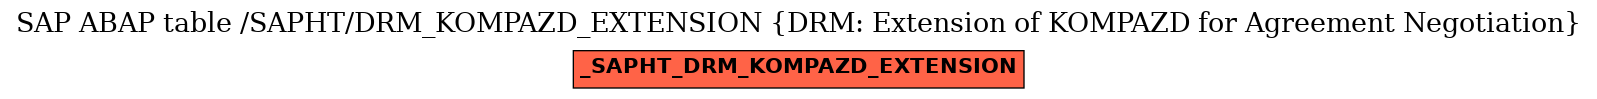 E-R Diagram for table /SAPHT/DRM_KOMPAZD_EXTENSION (DRM: Extension of KOMPAZD for Agreement Negotiation)